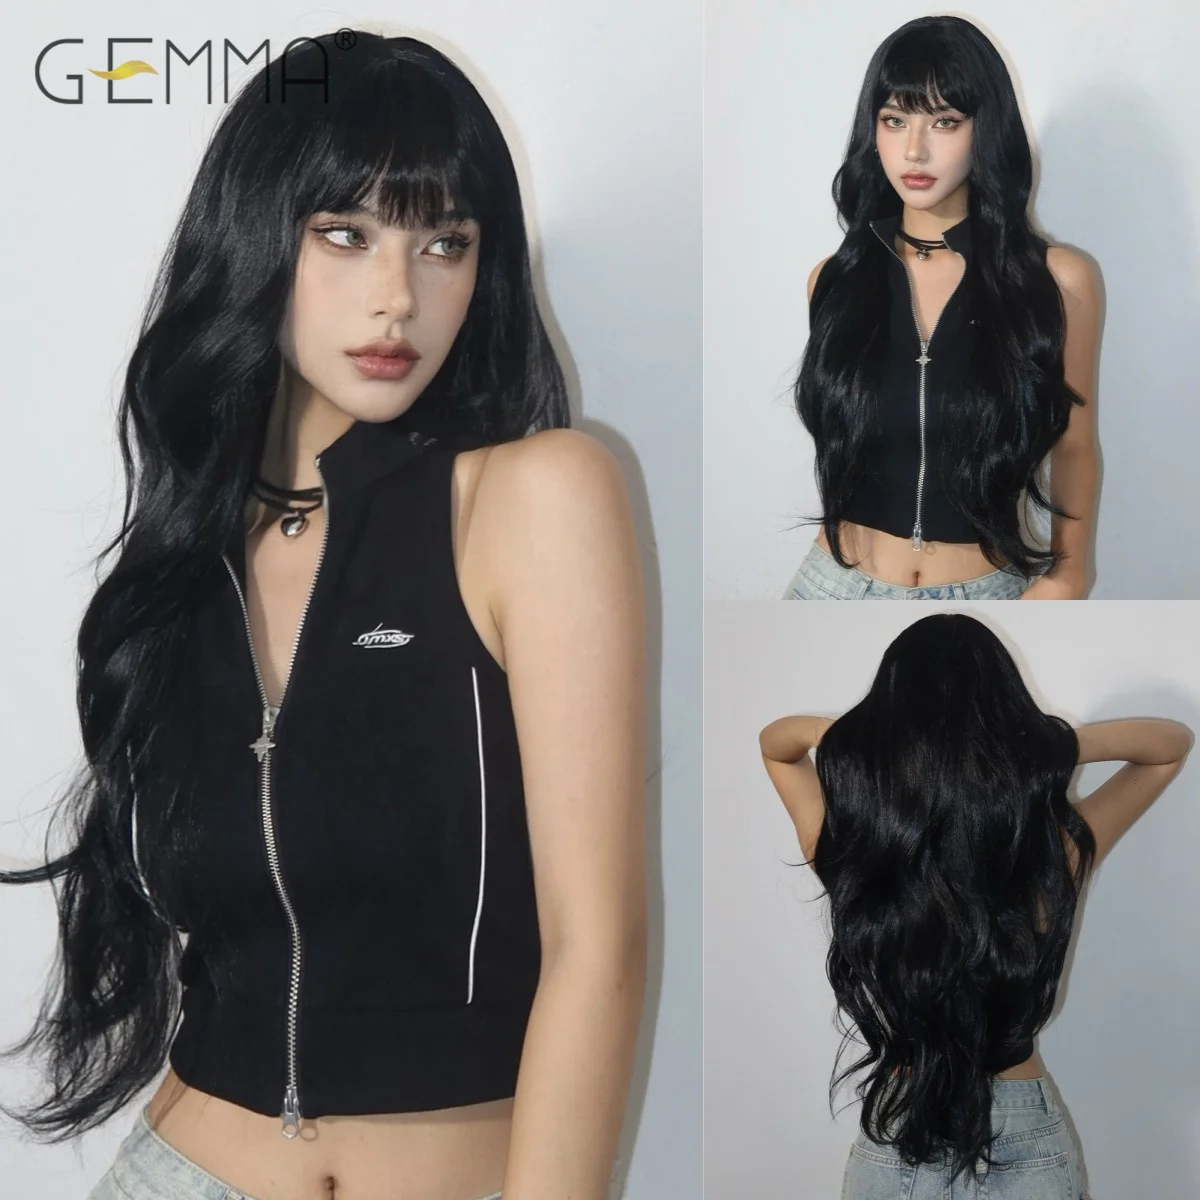 Black Synthetic Long Wavy Wig with Fluffy Bangs Natural Wave Wigs for Women Cosplay Daily Use Fake Hair Heat Resistant Fibre long wavy light ash blonde synthetic wigs with bangs for women natural wave cosplay party daily use hair wigs heat resistant